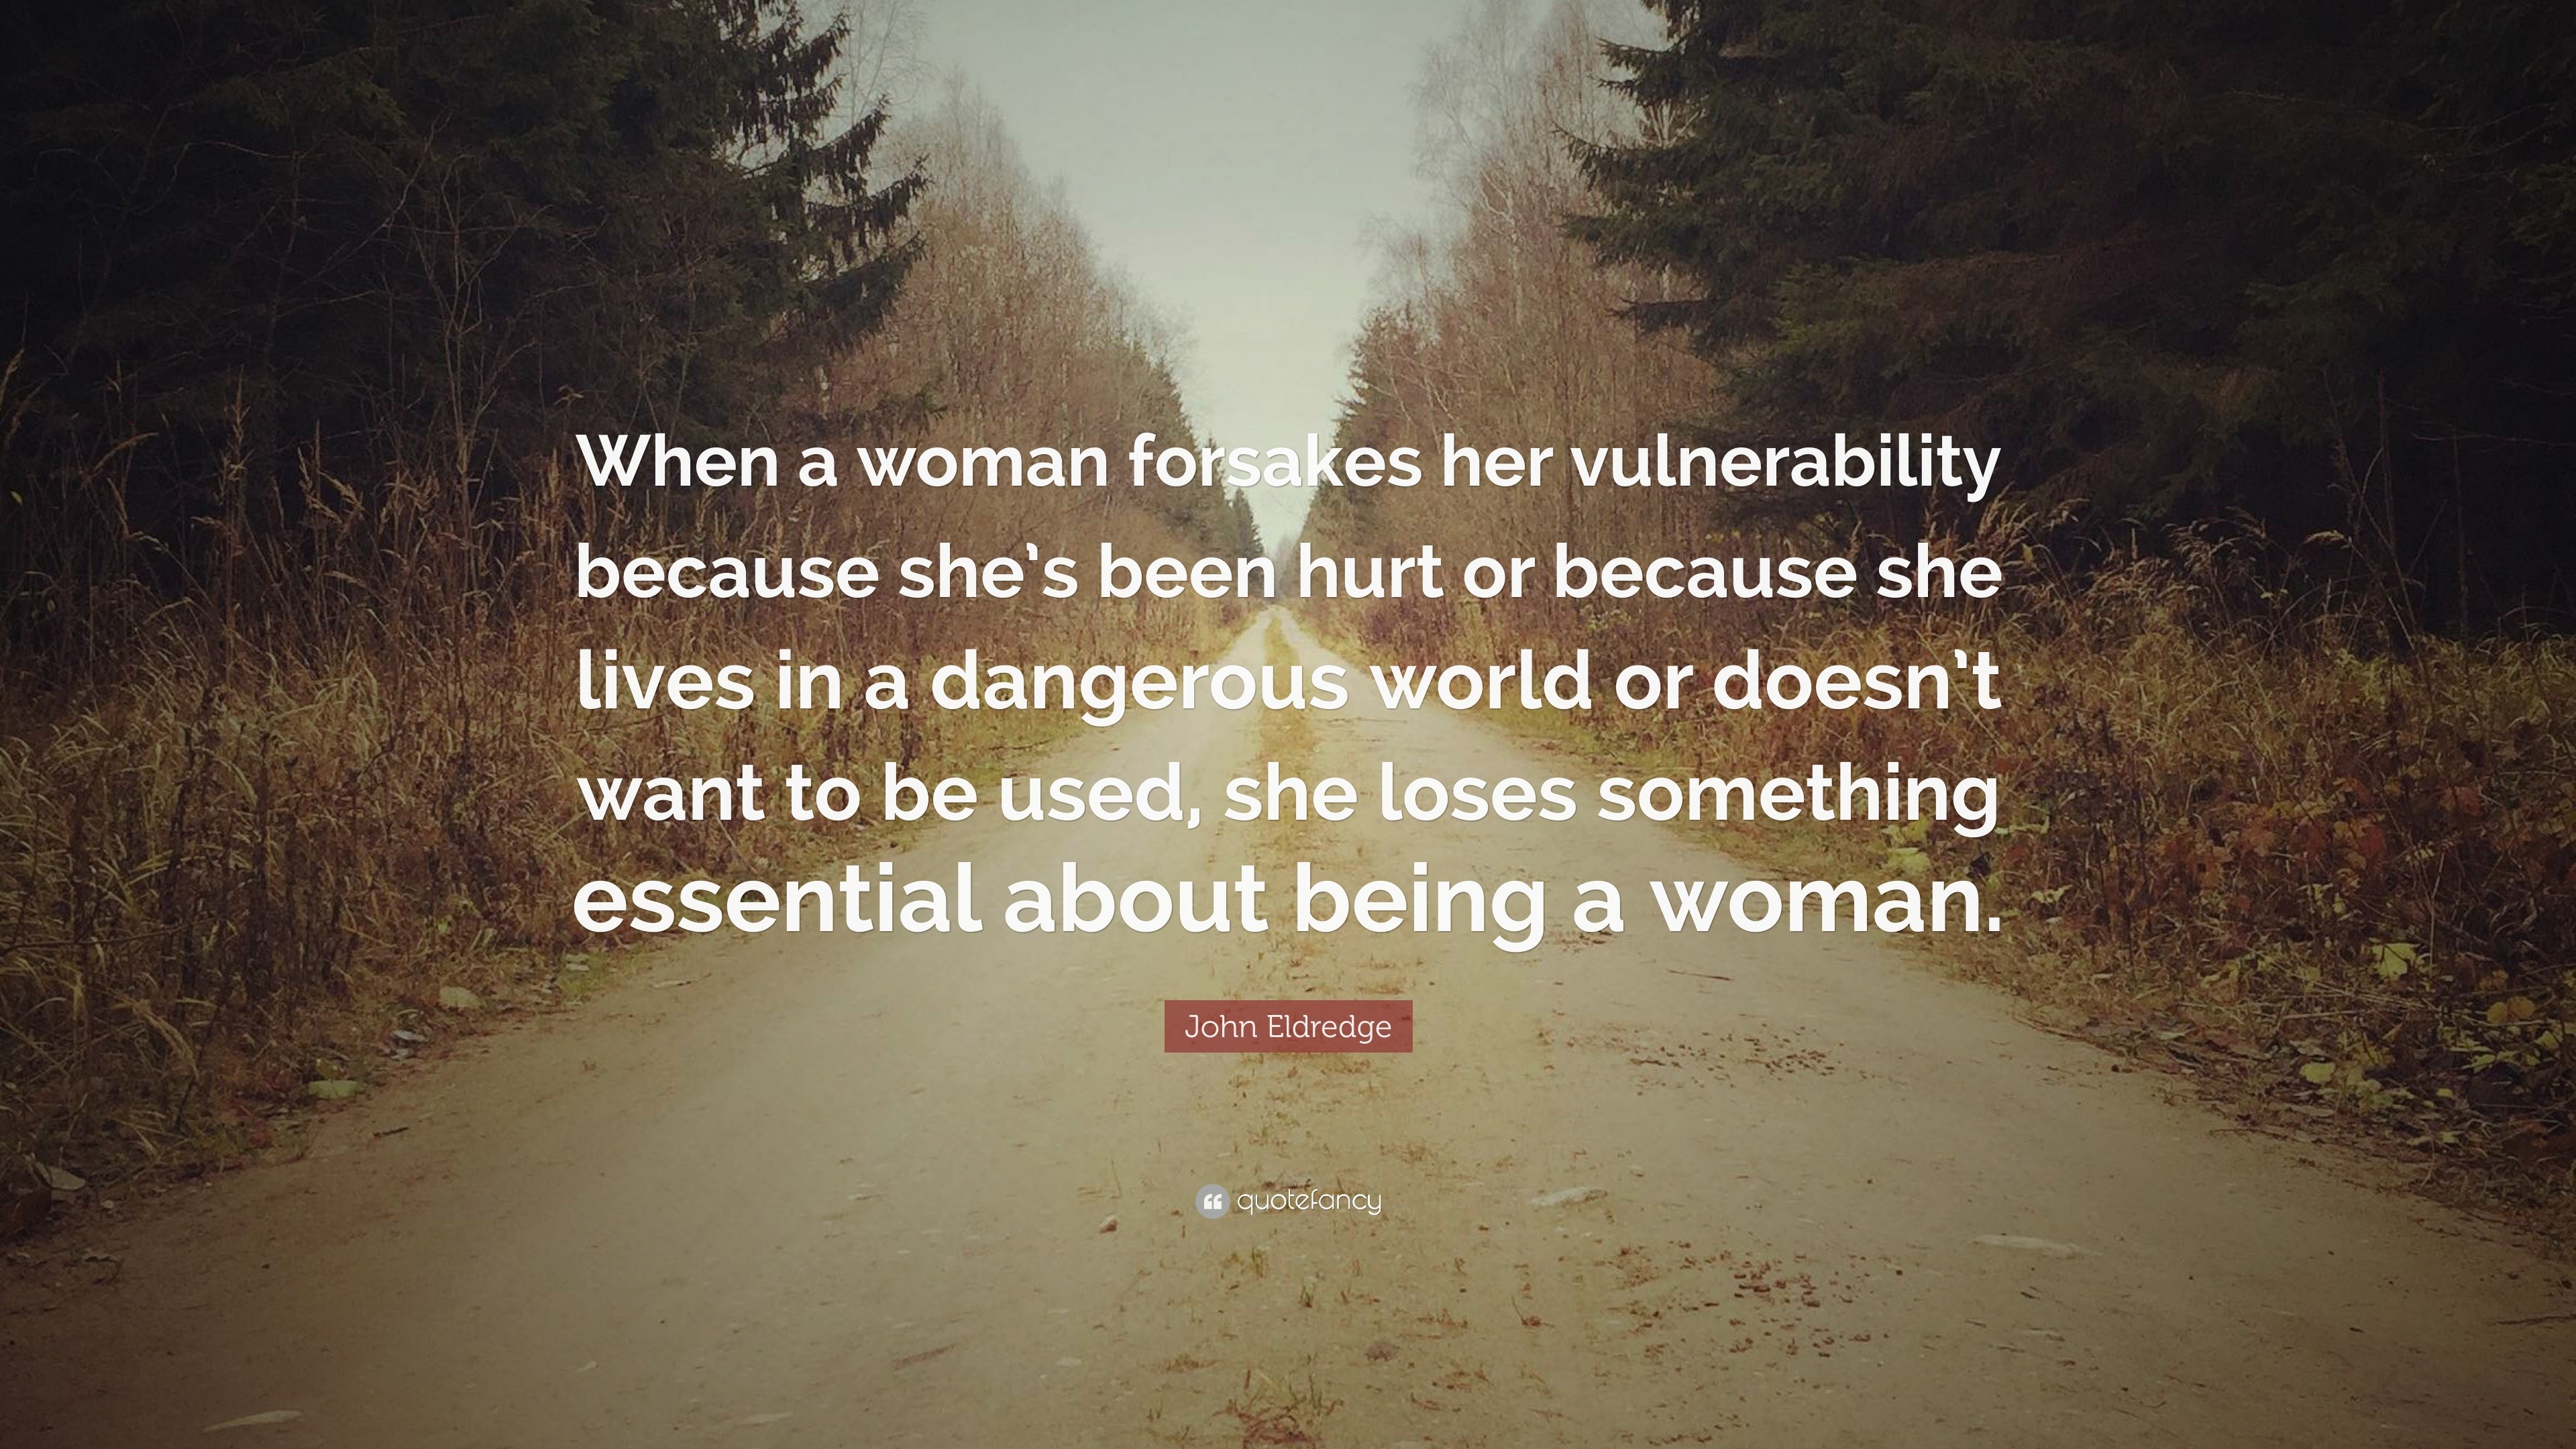 John Eldredge Quote: “When a woman forsakes her vulnerability because ...